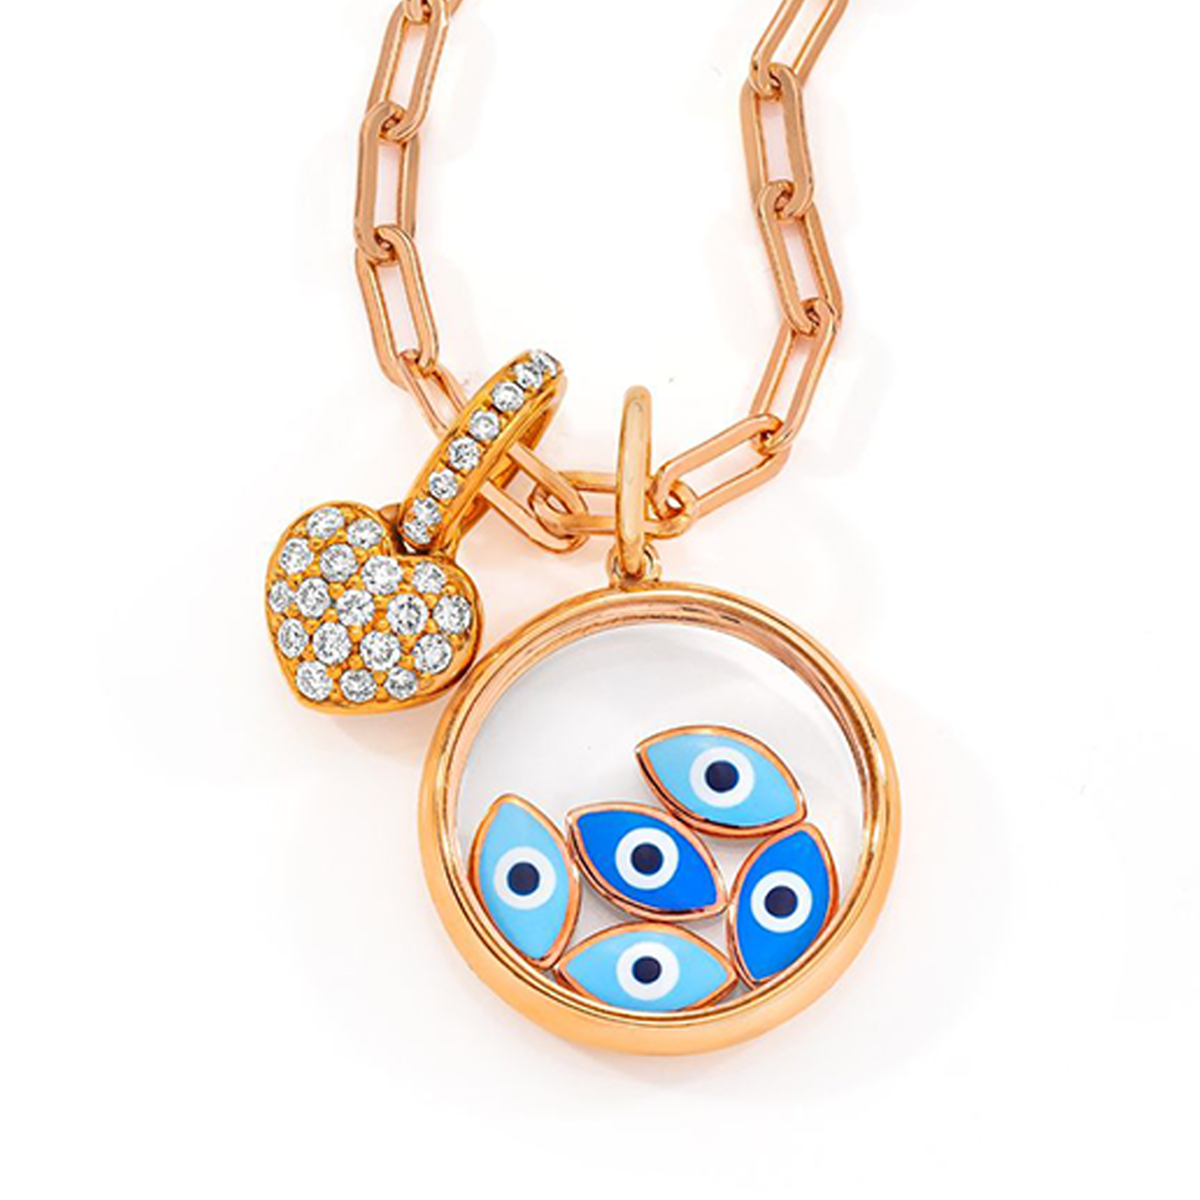 Floating Eye Charm Necklace - Items Sold Separately